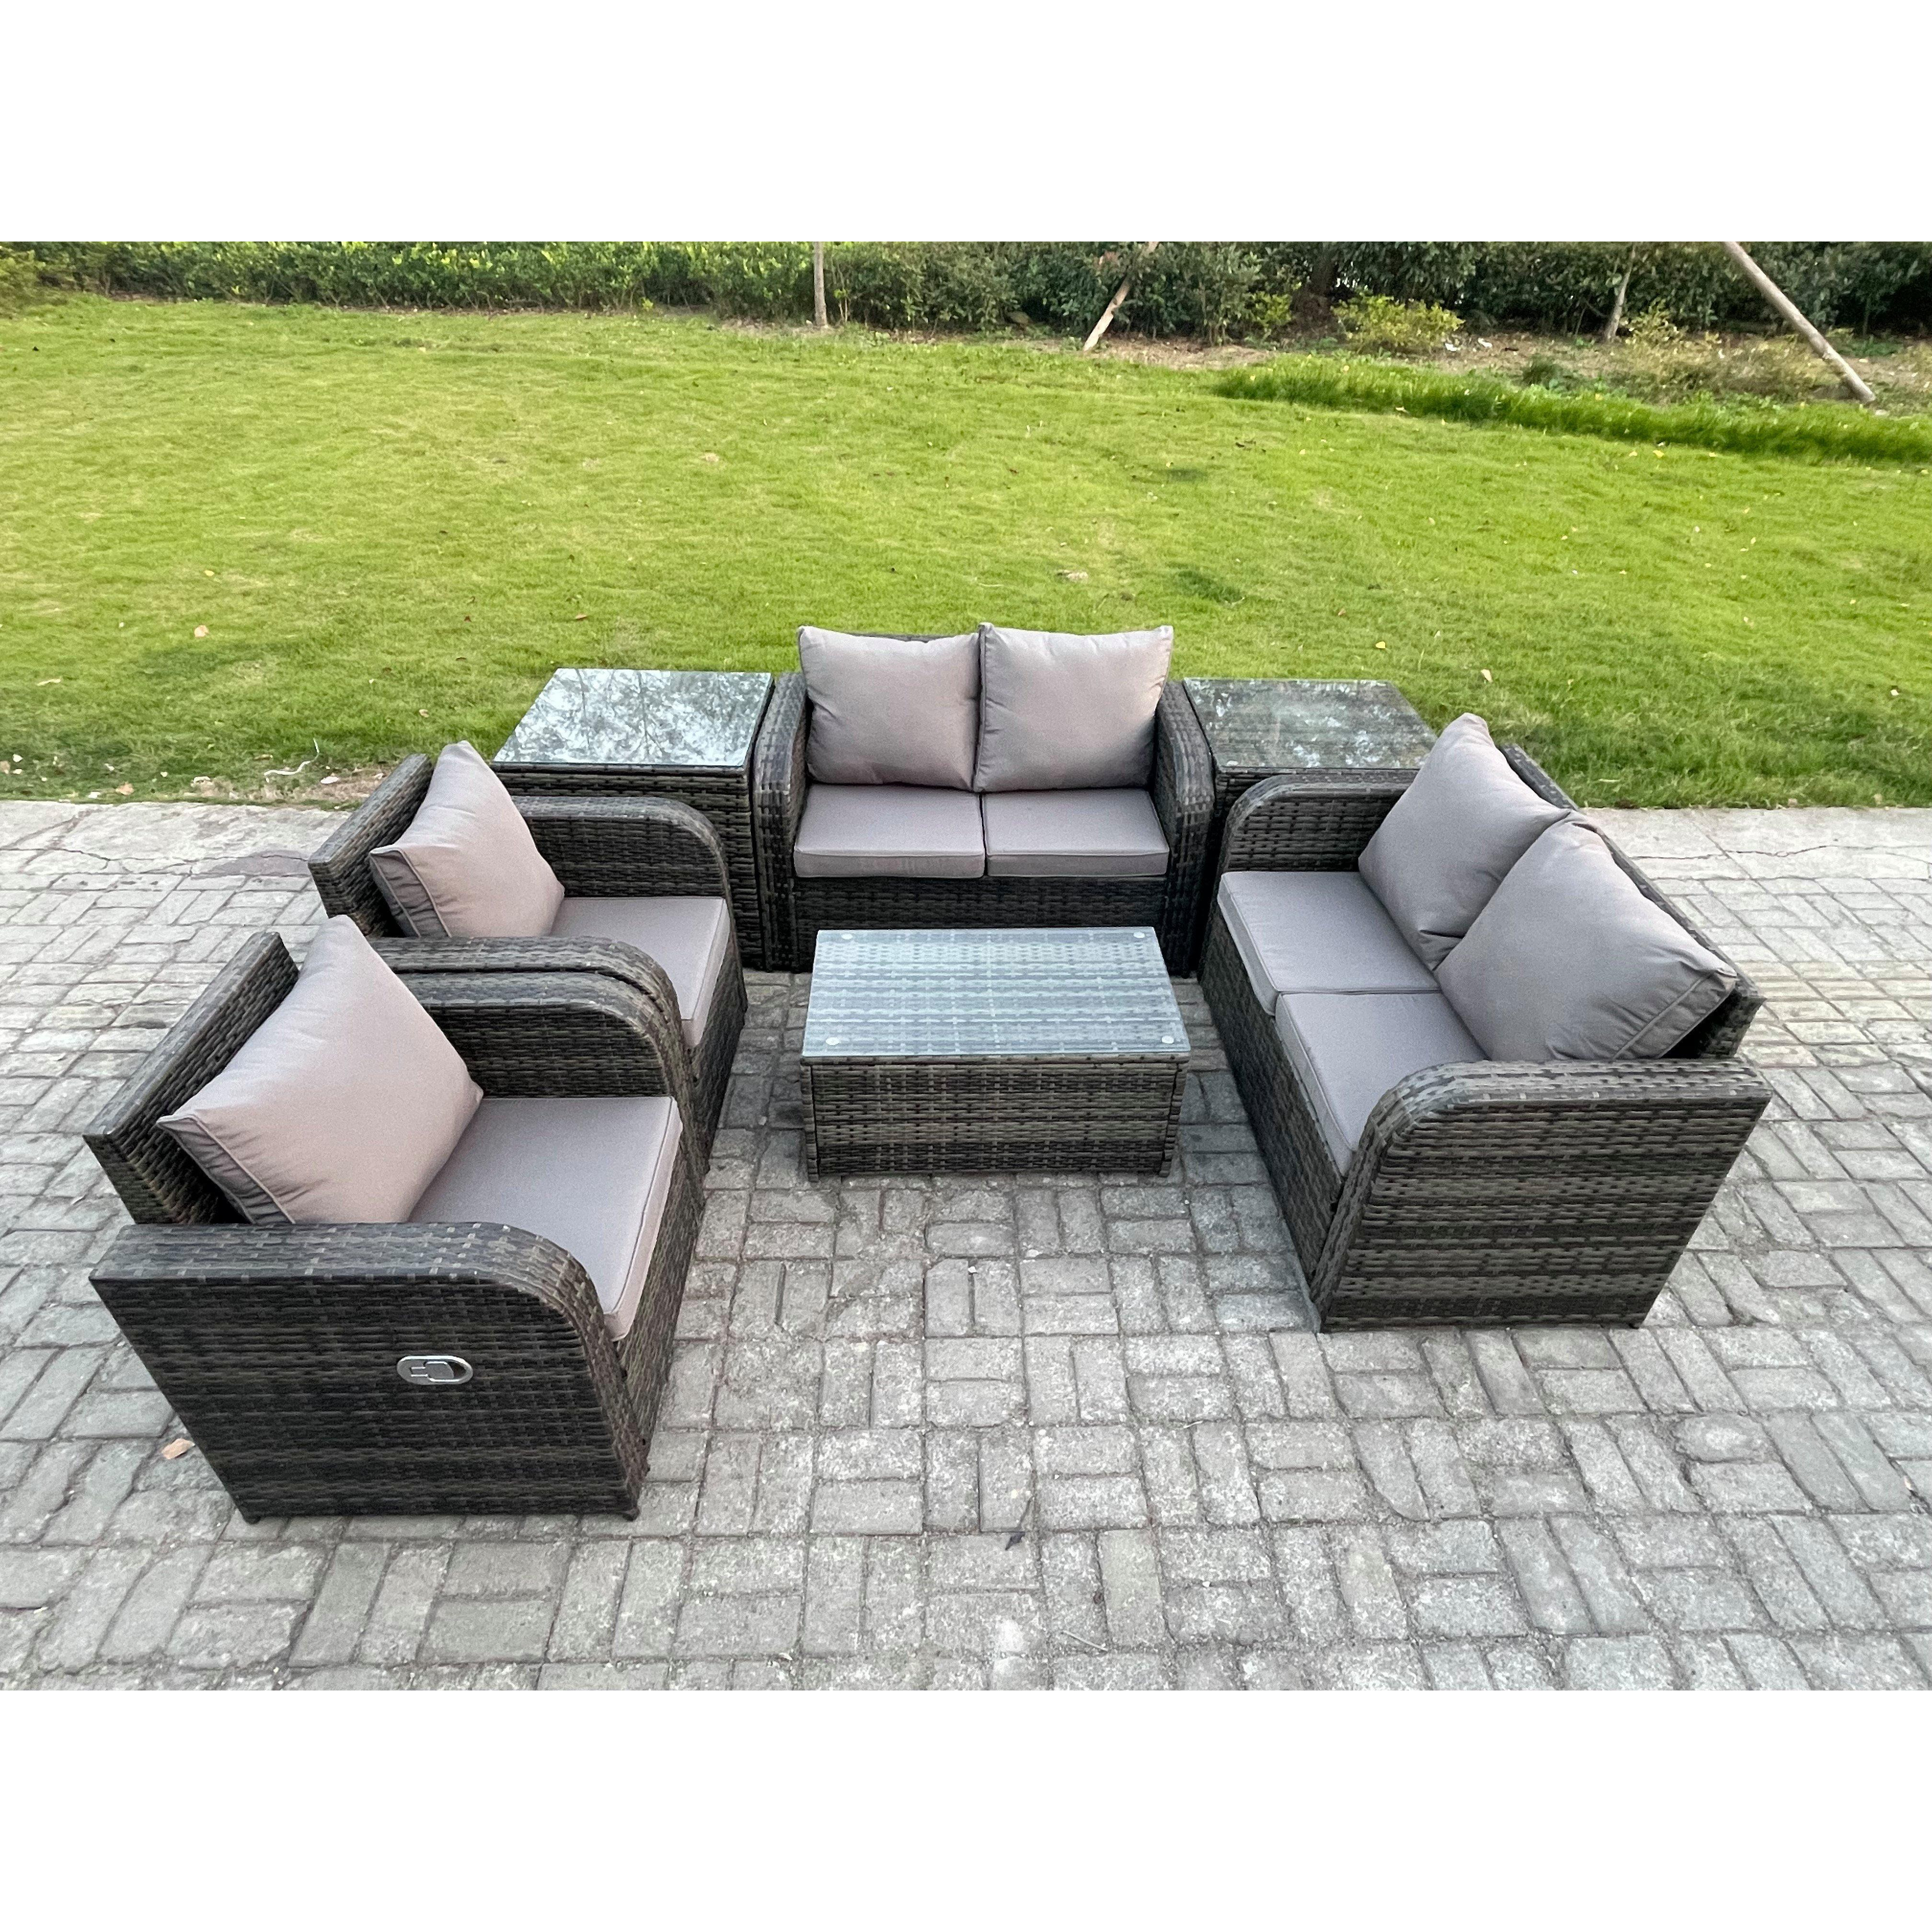 Rattan Garden Furniture Set Patio Outdoor Lounge Sofa Set with 2 Reclining Chairs Rectangular Coffee Table 2 Side Tables - image 1